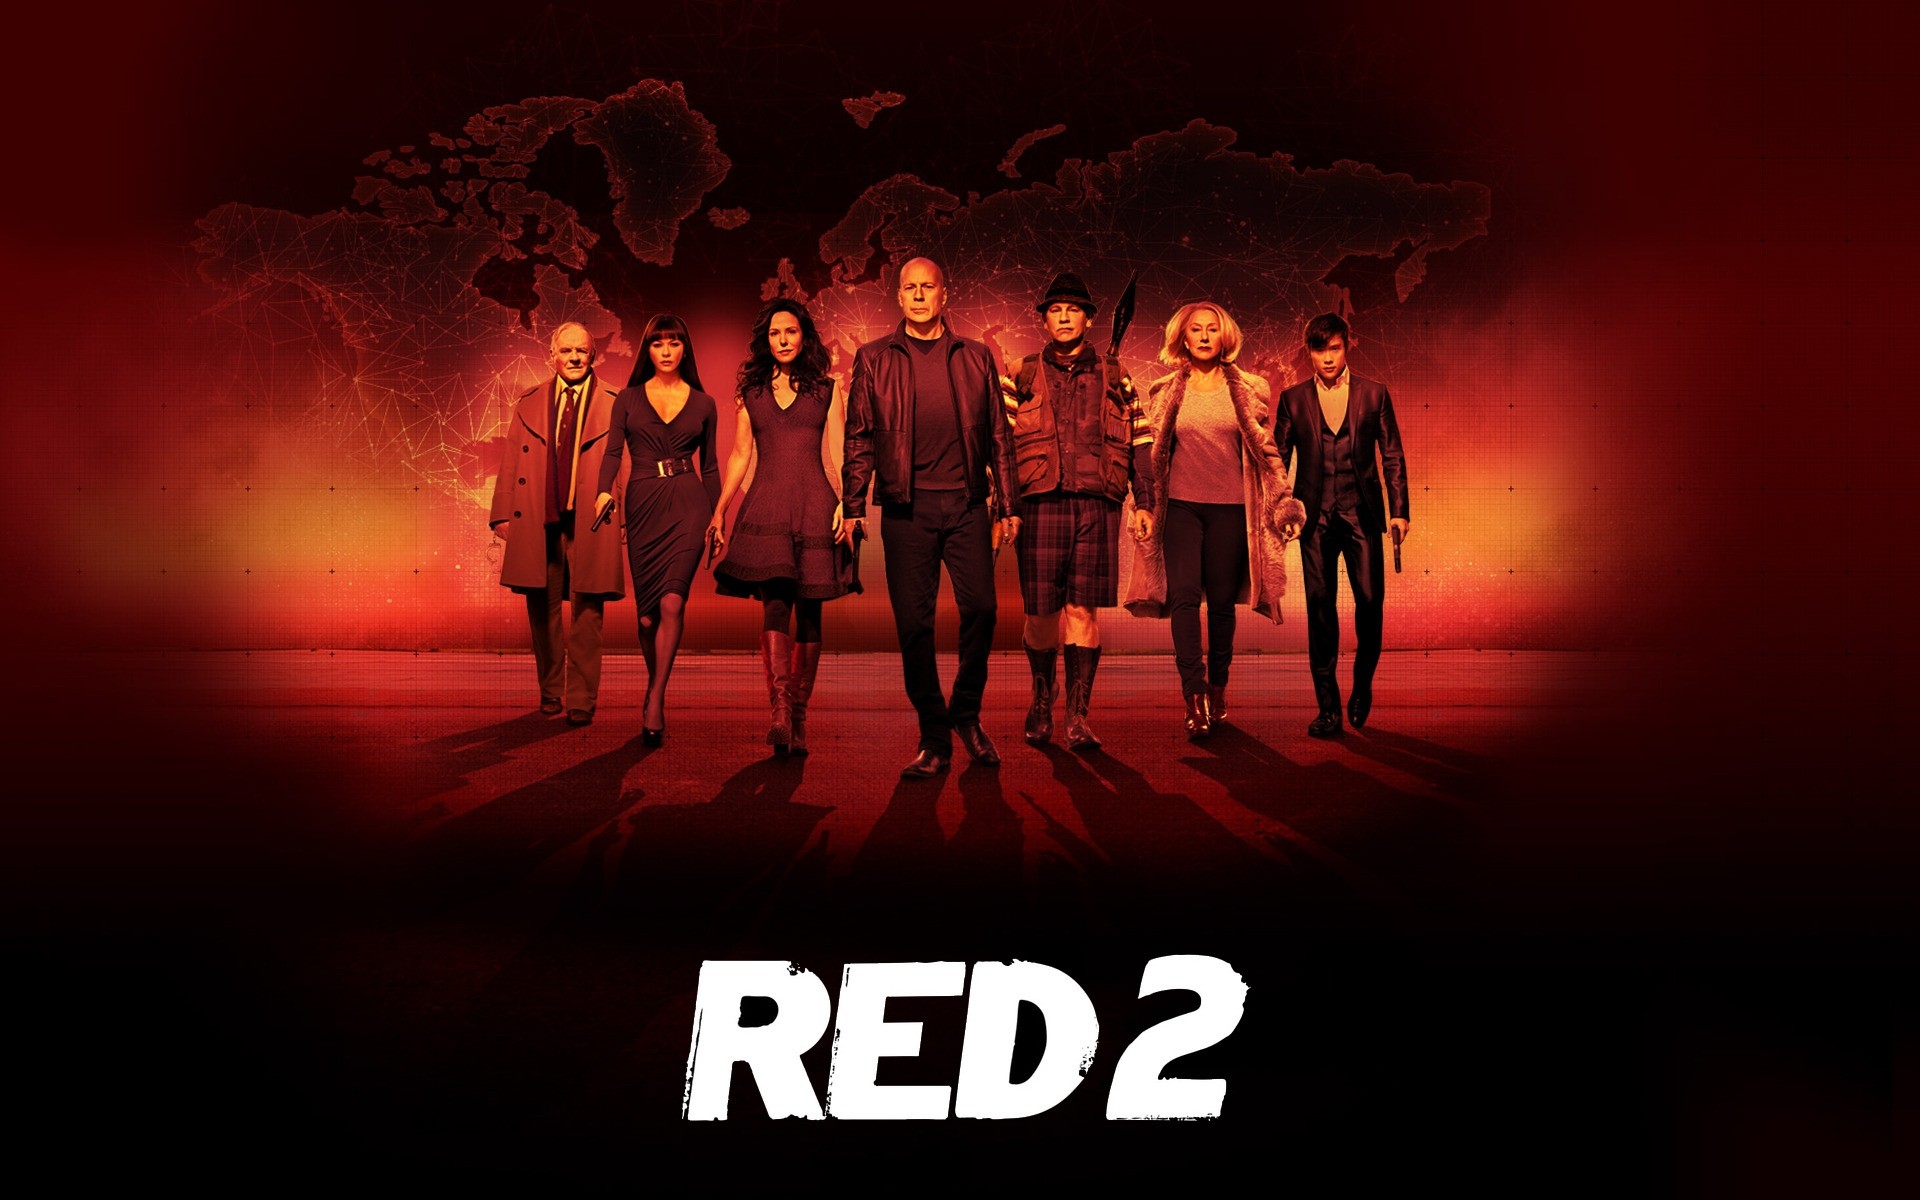 Movies Man Woman Group Adult Music Red 2 Movie Red - Red 2 Soundtrack Cover Art - HD Wallpaper 